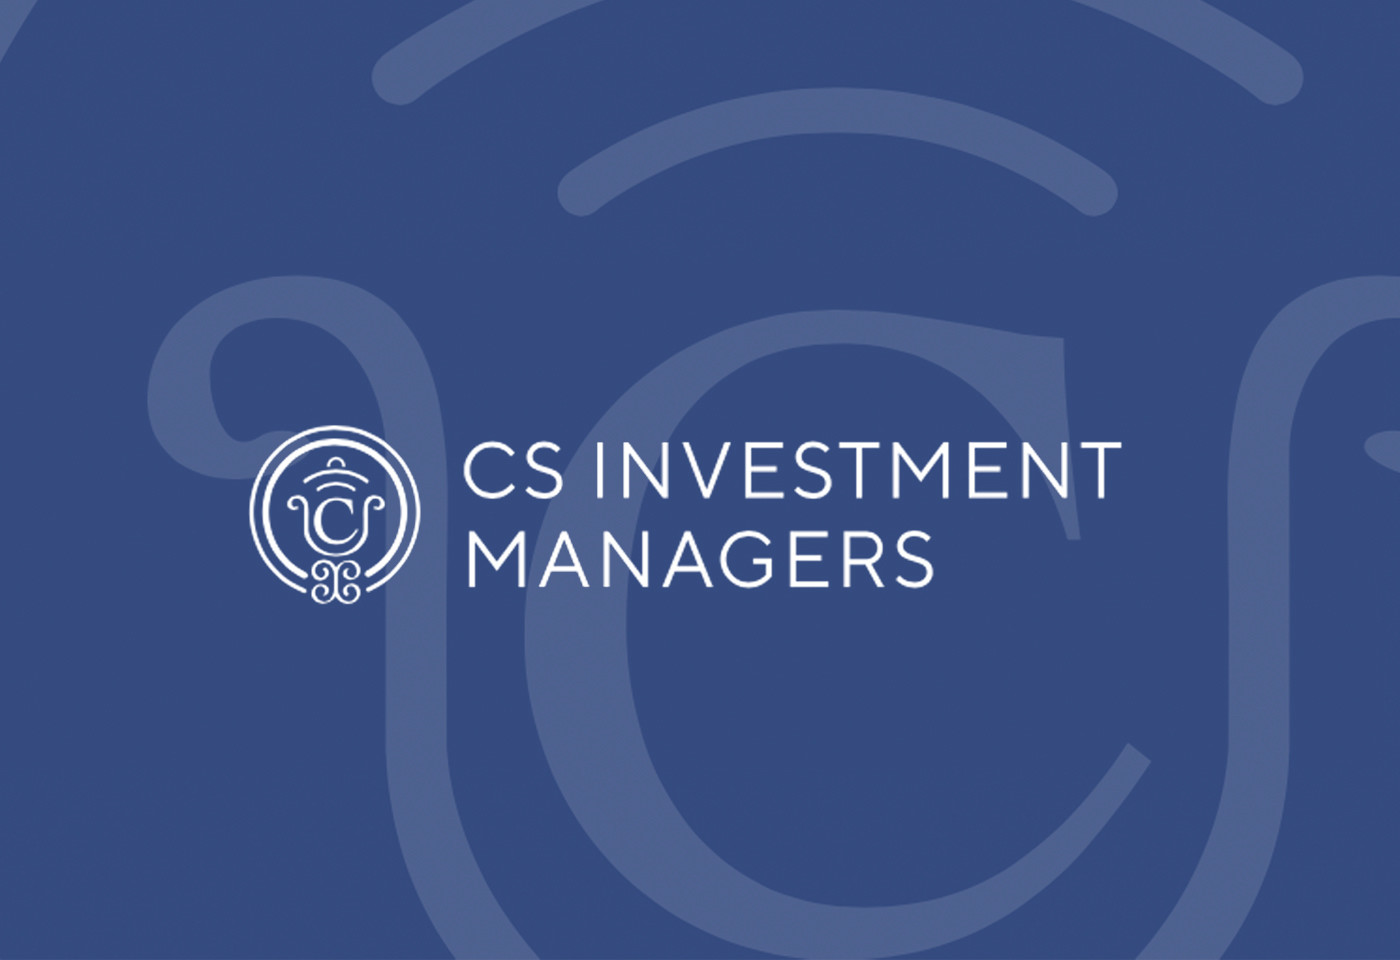 CS INVESTMENT MANAGERS